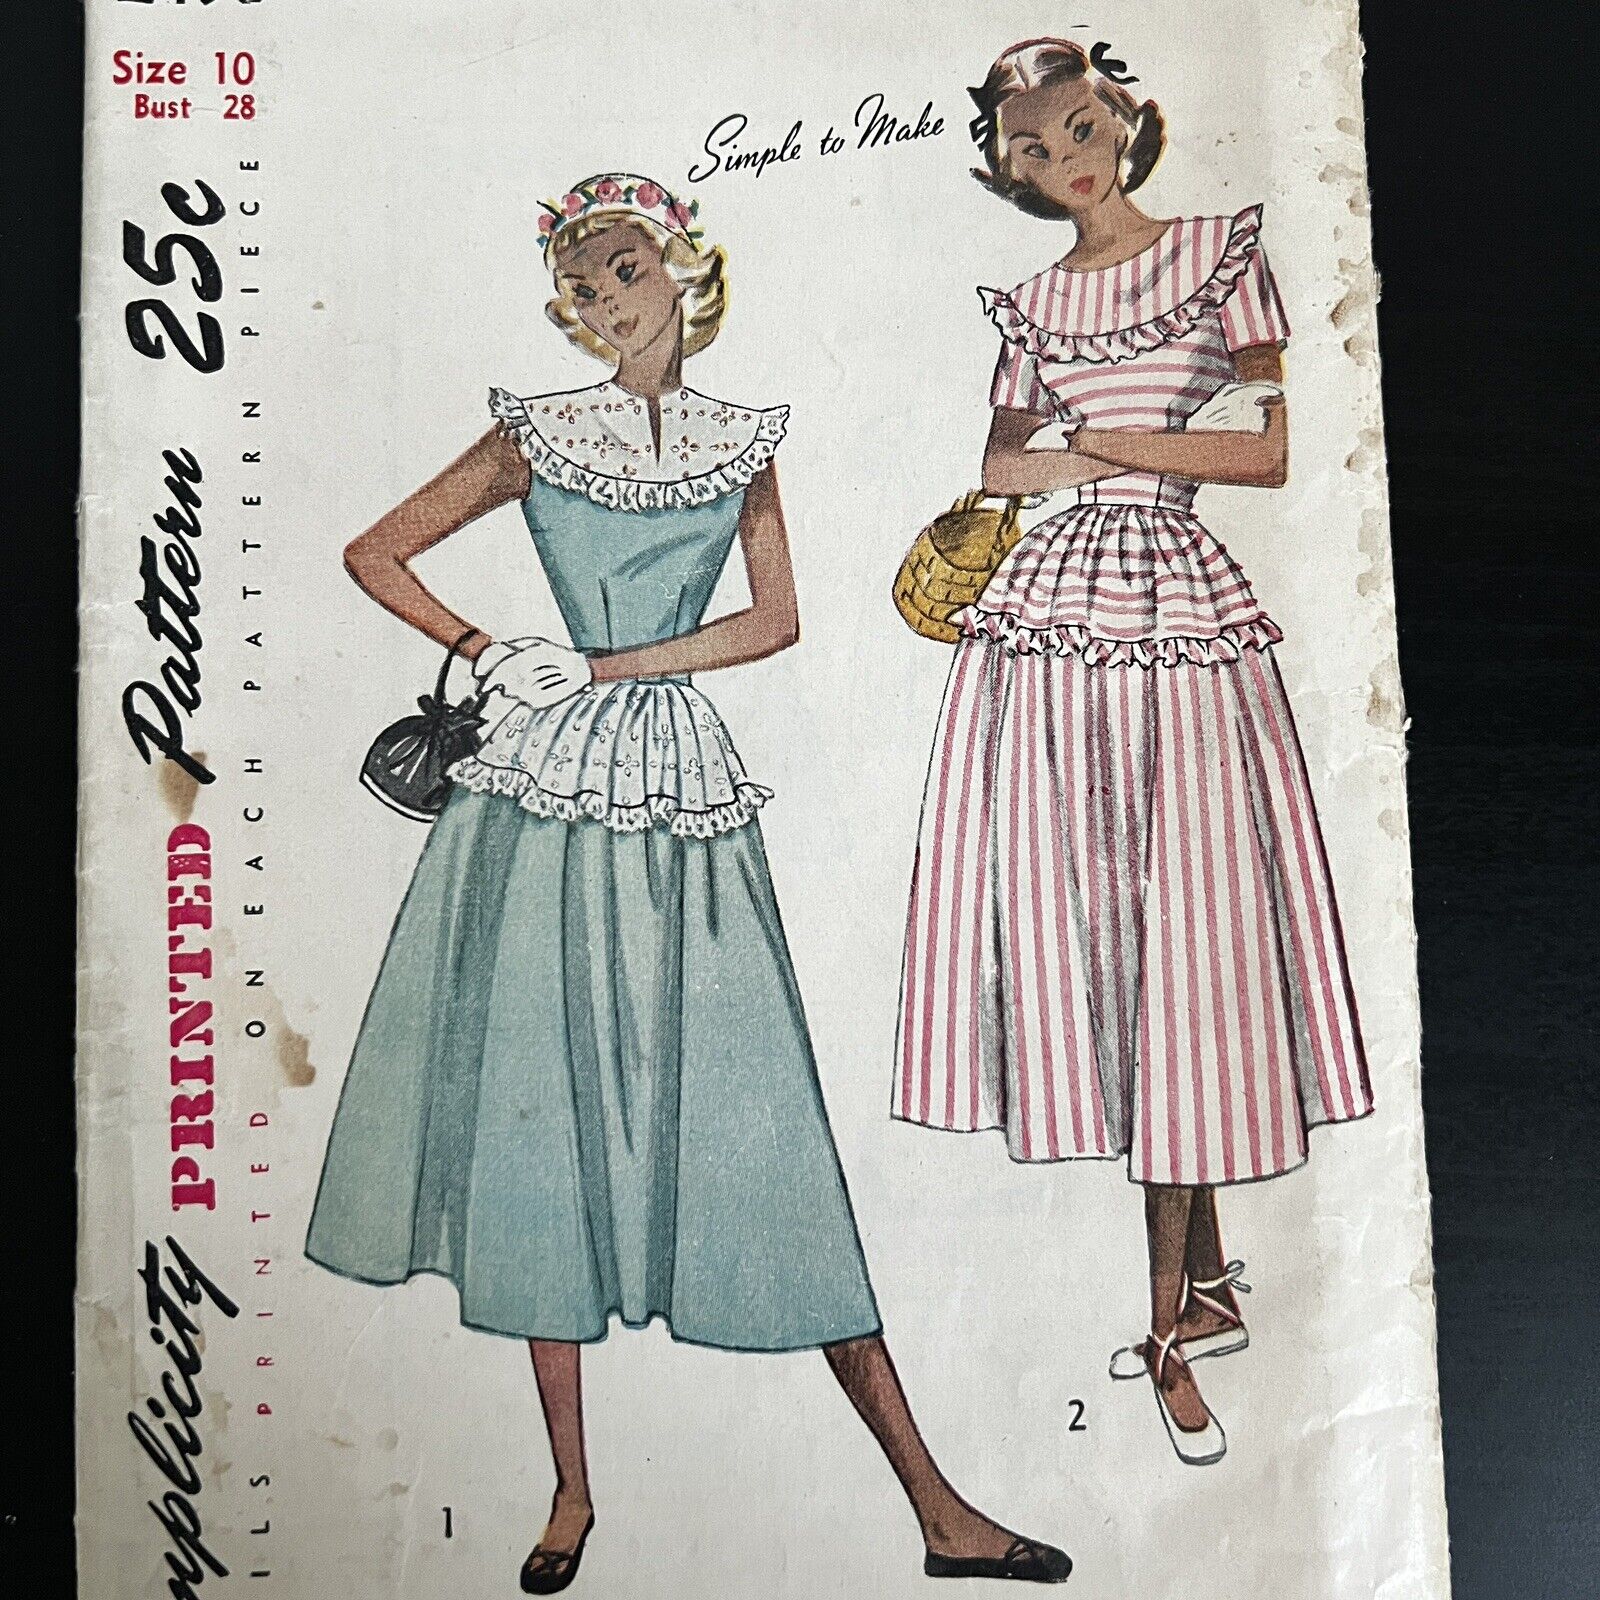 Vintage 1940s Simplicity 2498 Teen Ruffle Coquette Dress Sewing Pattern 10 UNCUT